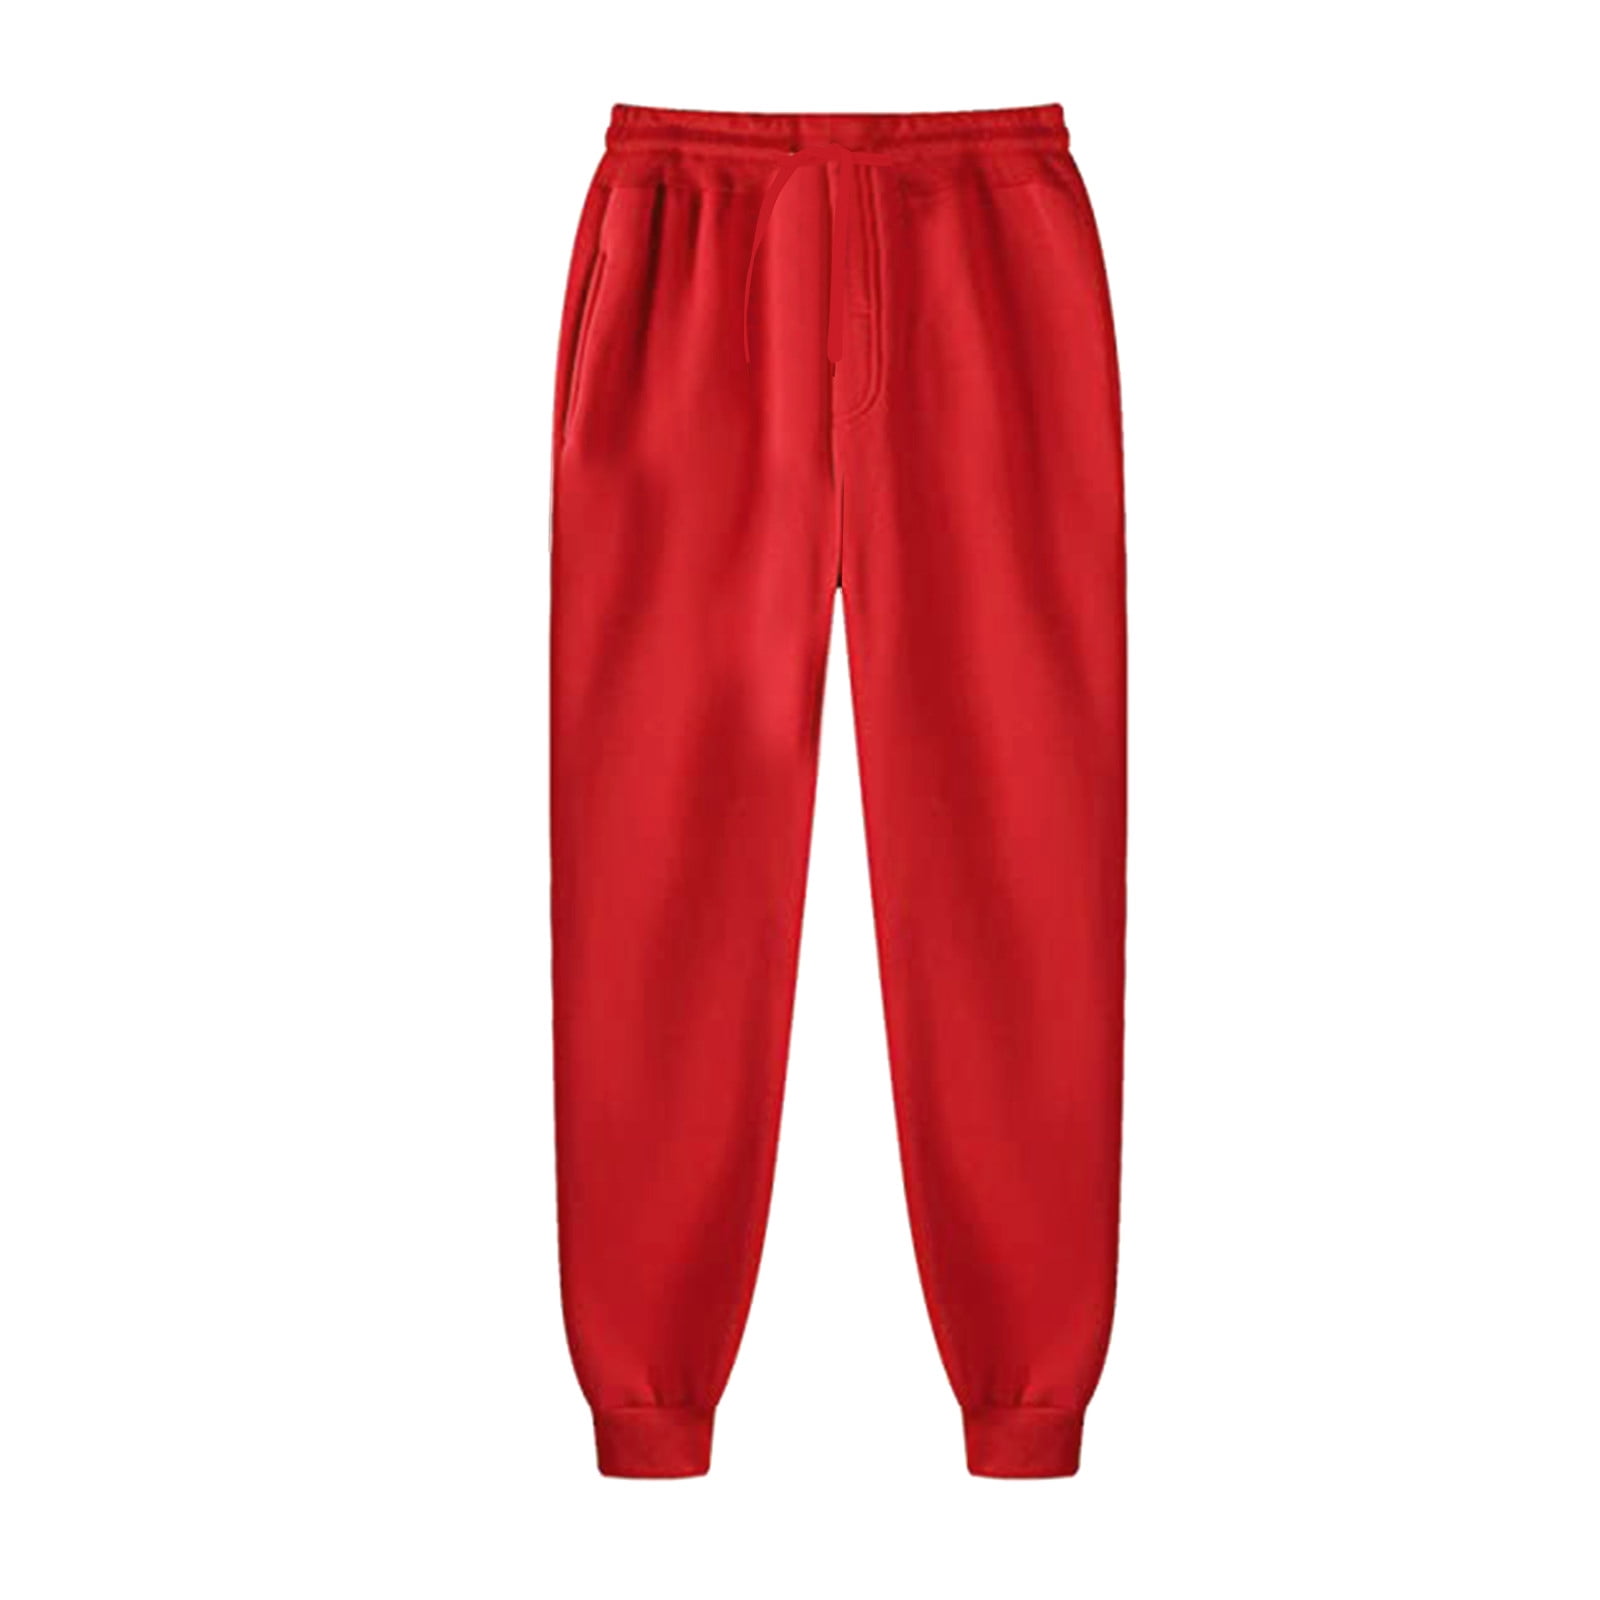 Red Sweatpants For Men Men And Women Autumn And Winter Leisure